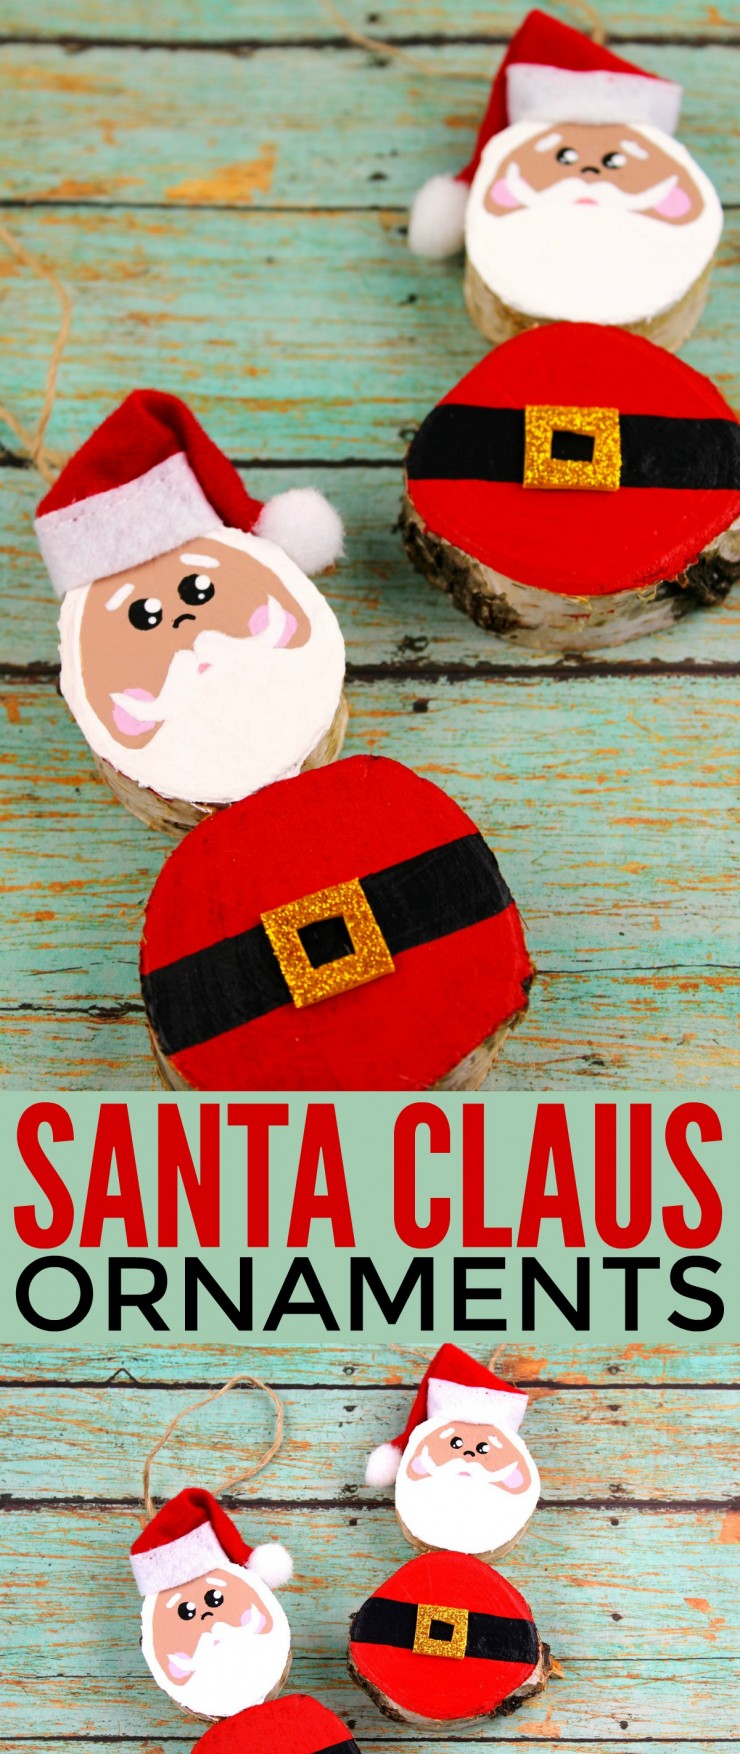 These Wood Slice Santa Claus Ornaments are an adorable and festive holiday craft that make for great keepsake gifts that look great on a Christmas tree.  We had so much fun making these Christmas ornaments! 